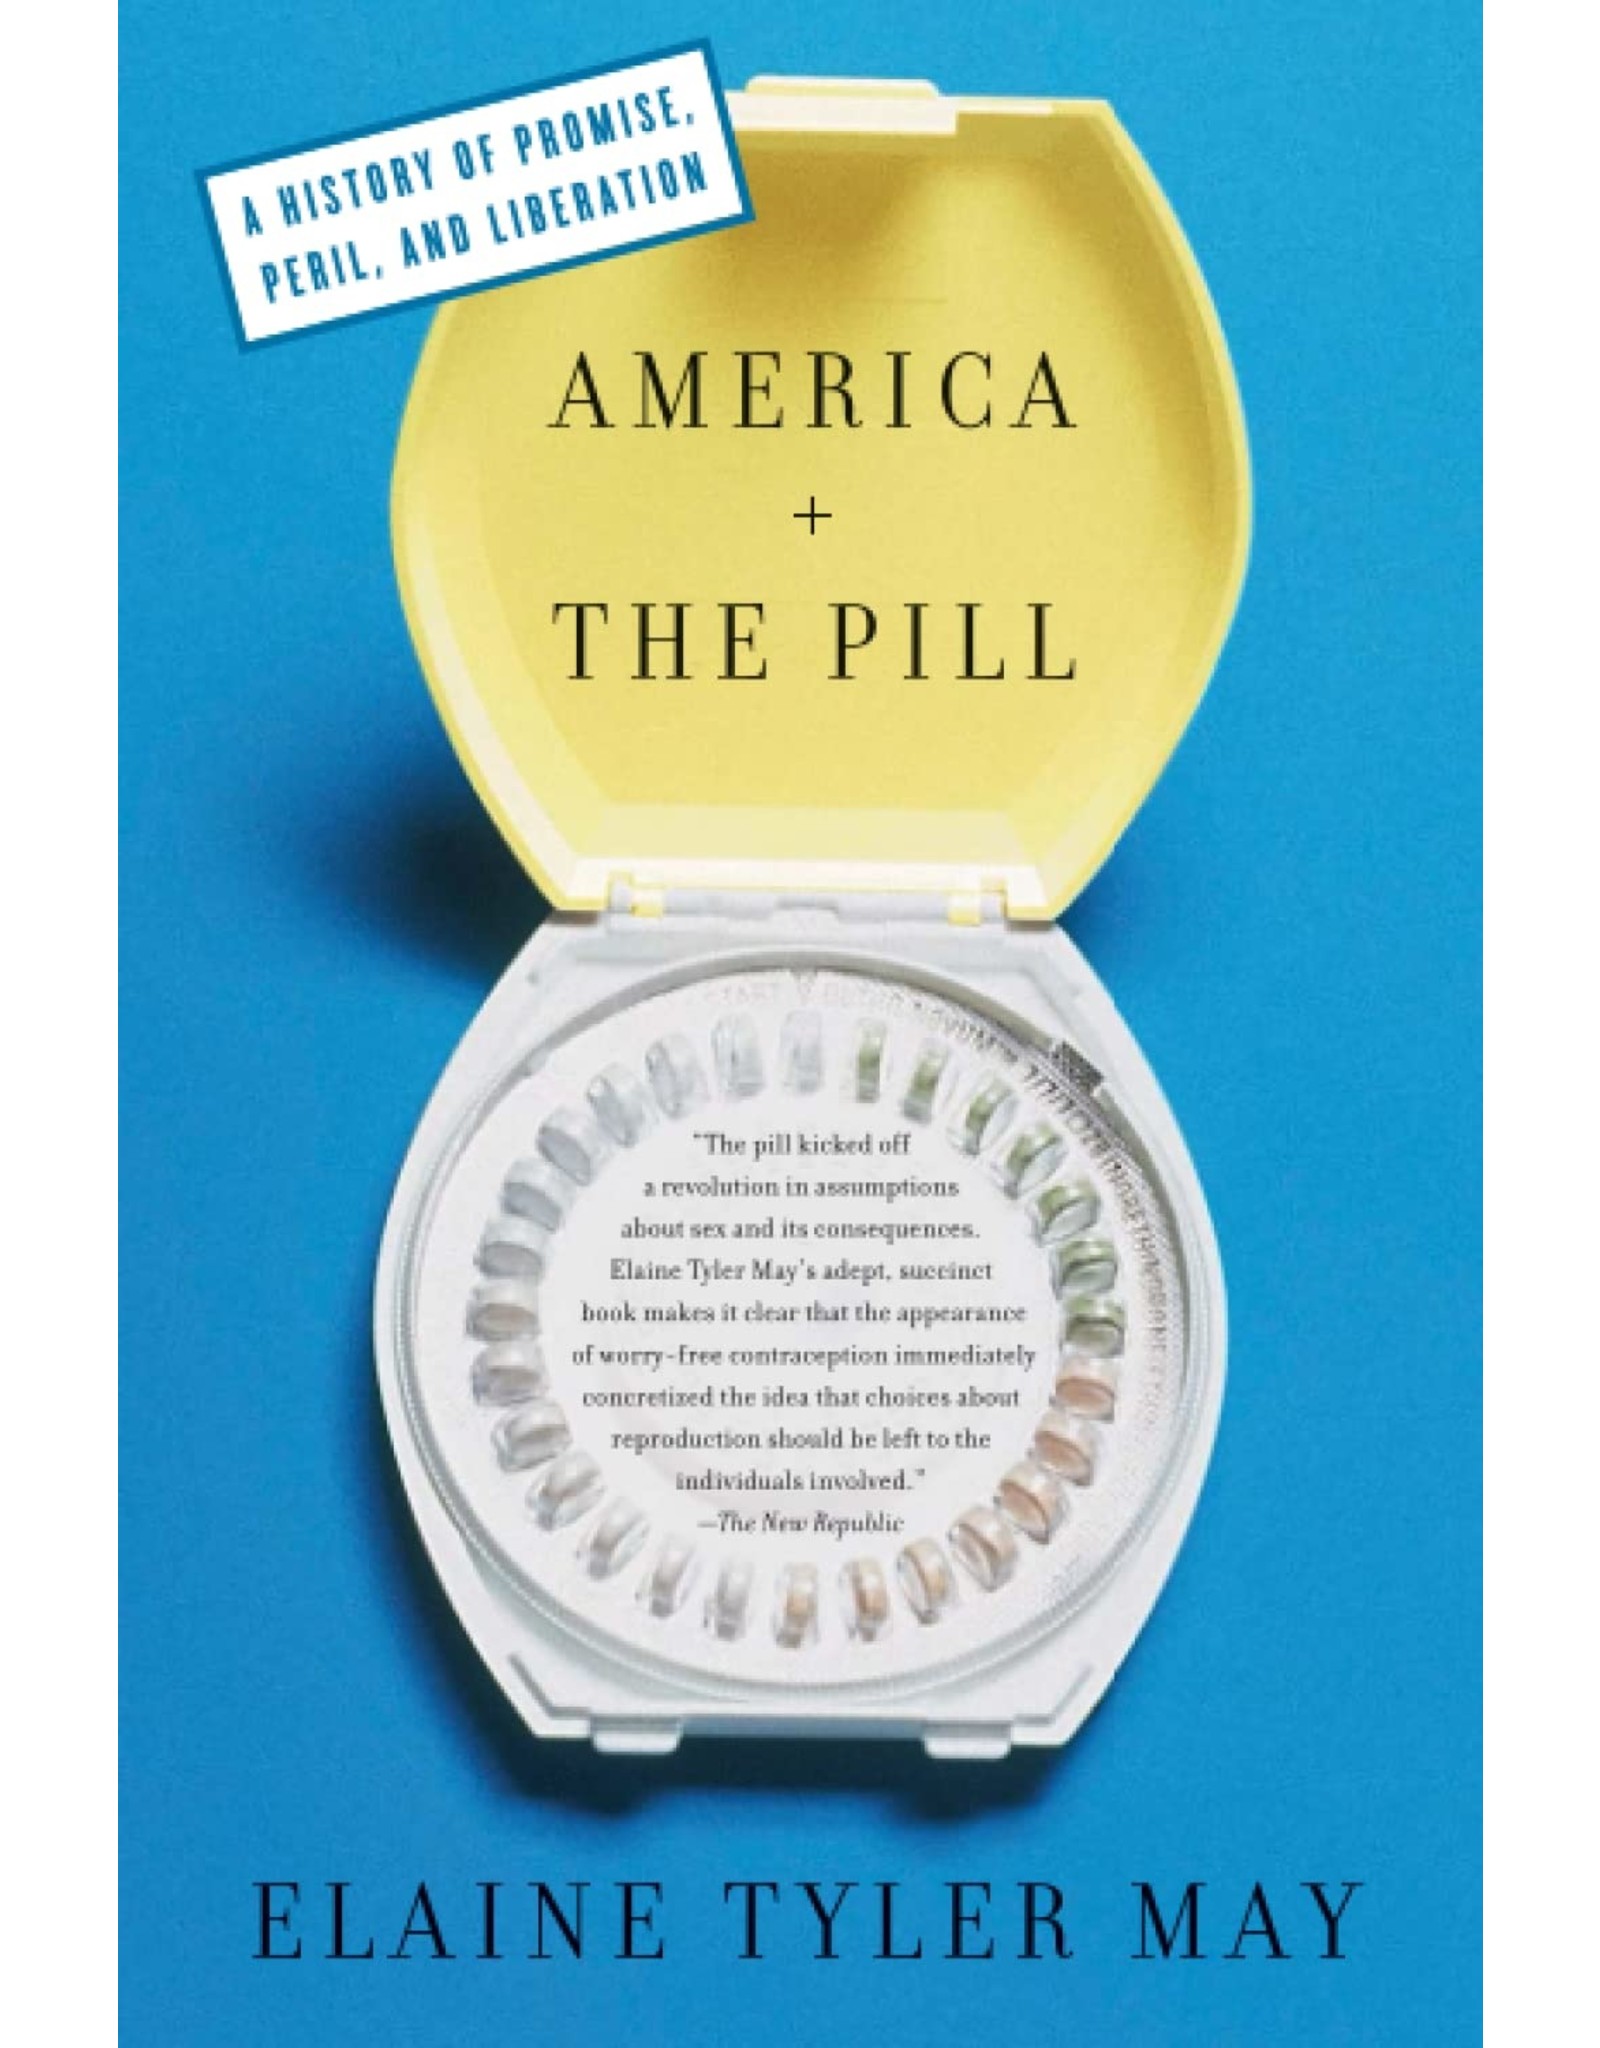 Literature America and the Pill: A History of Promise, Peril, and Liberation